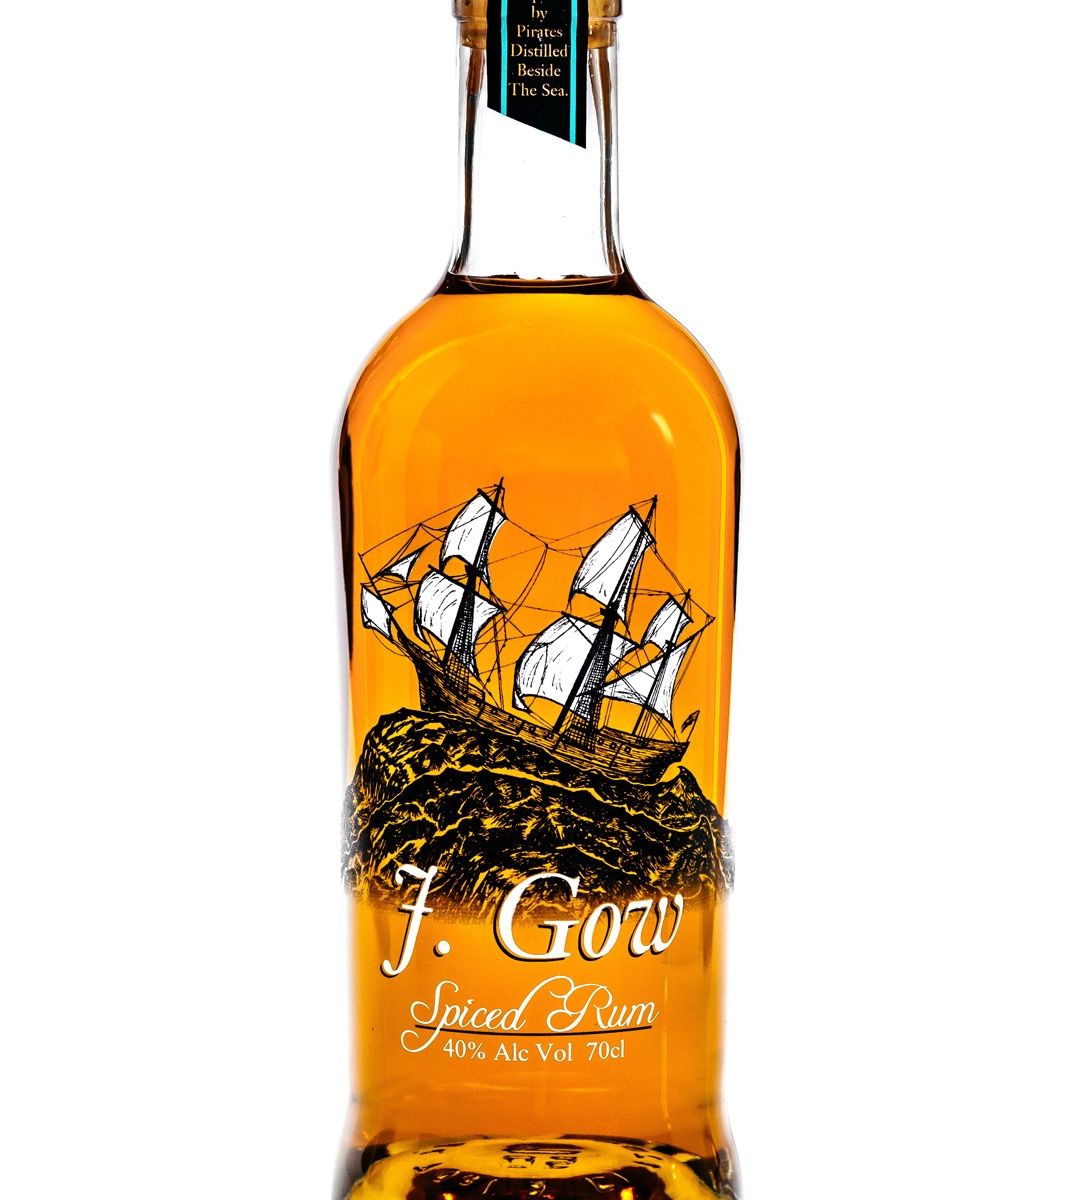 J Gow Spiced Rum Other Spirits